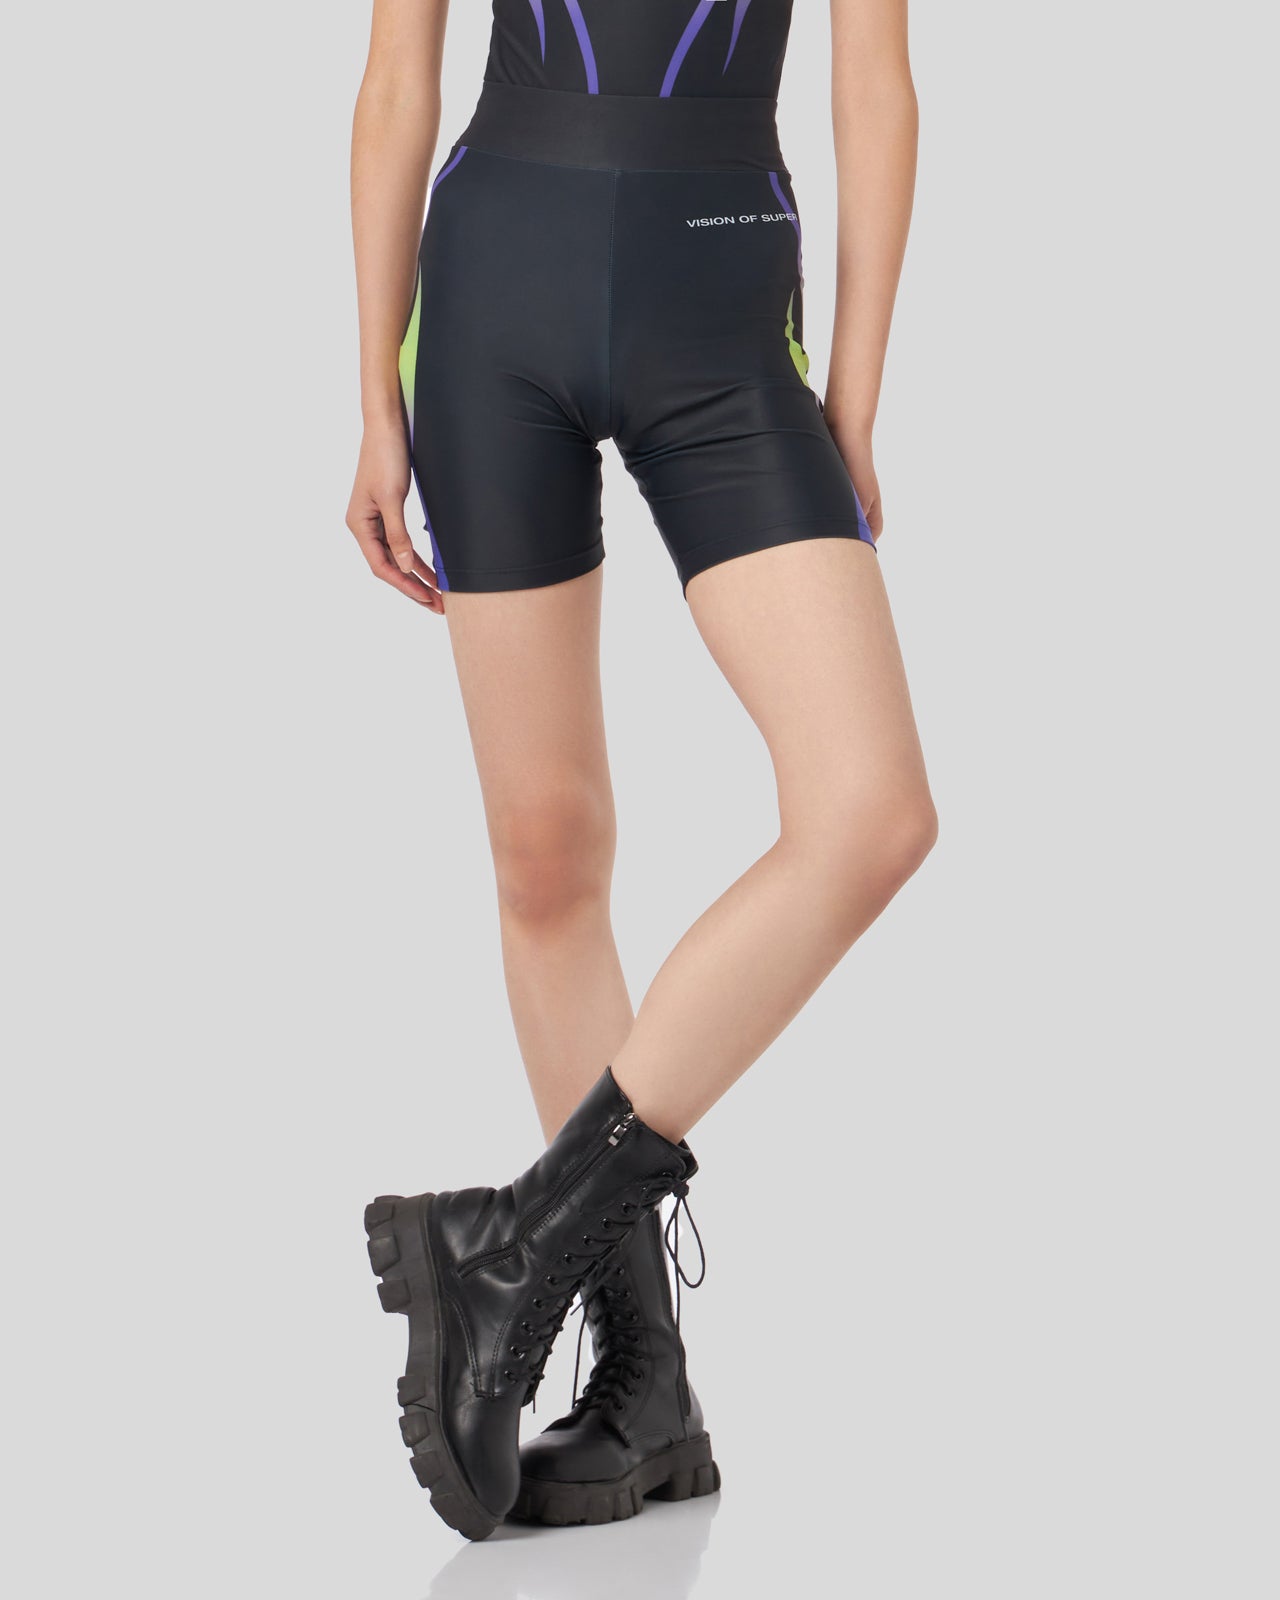 CYCLE SHORTS NERI CON FIAMME TRIBALI